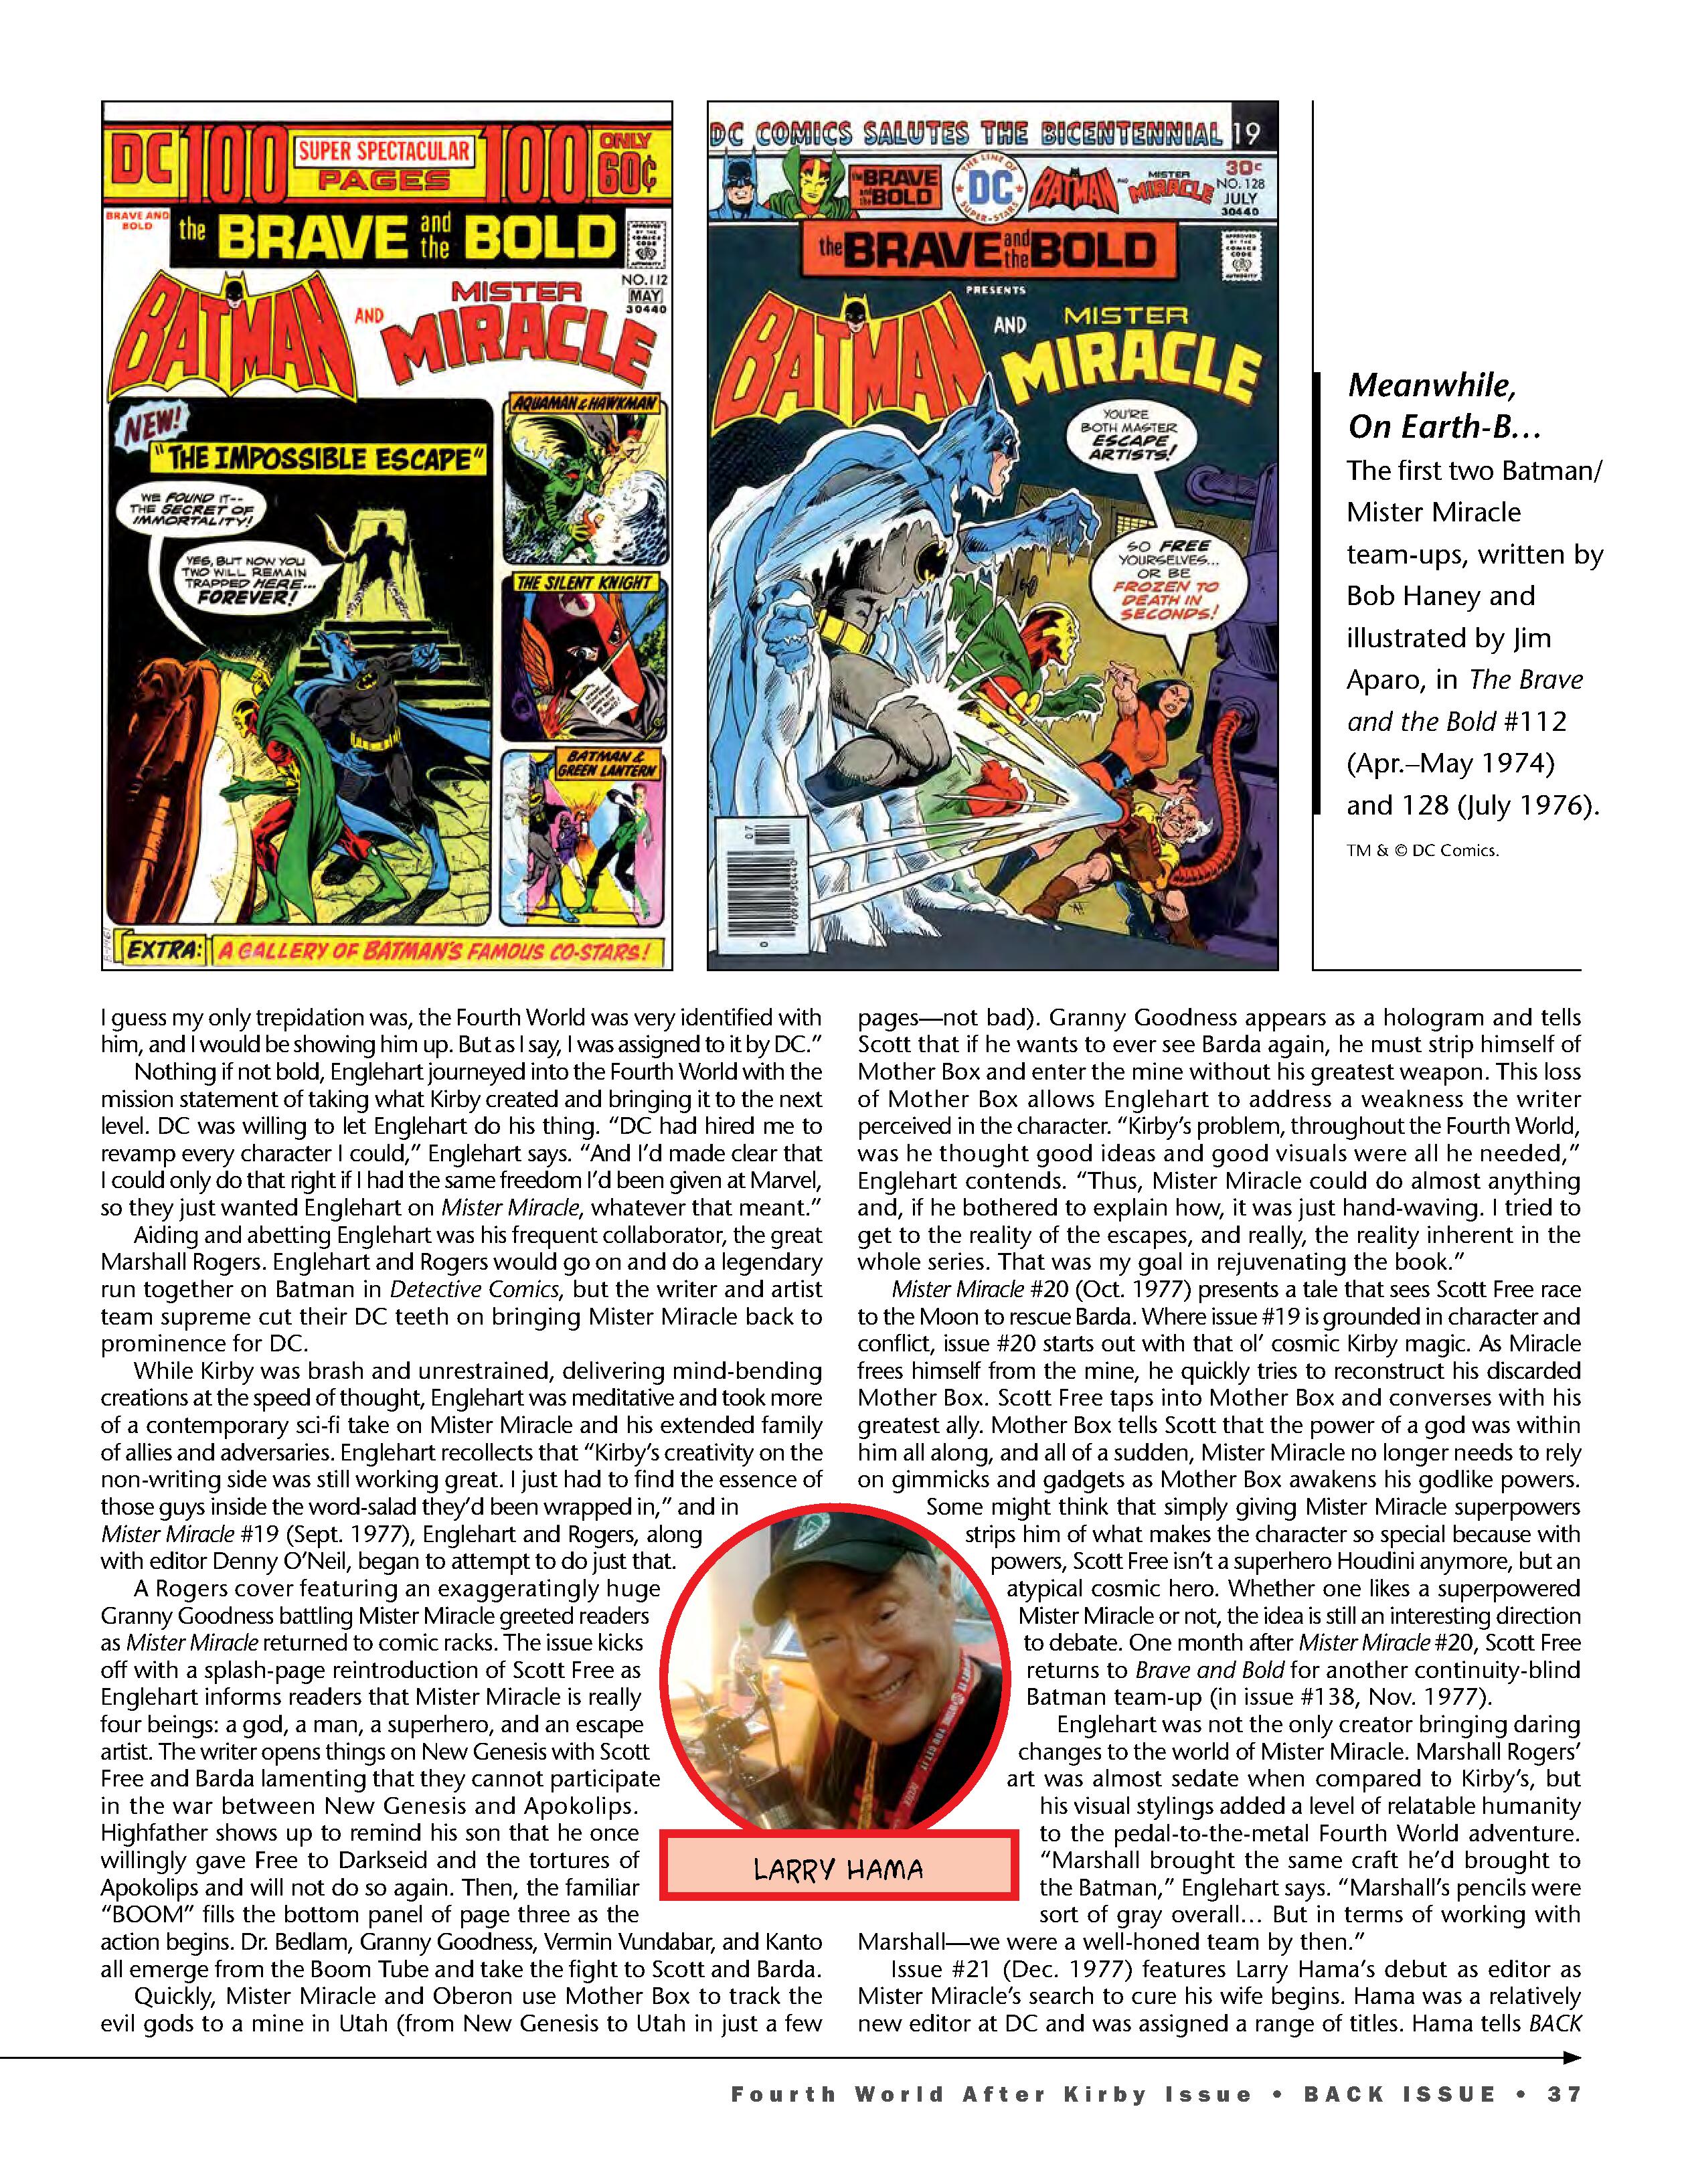 Read online Back Issue comic -  Issue #104 - 39